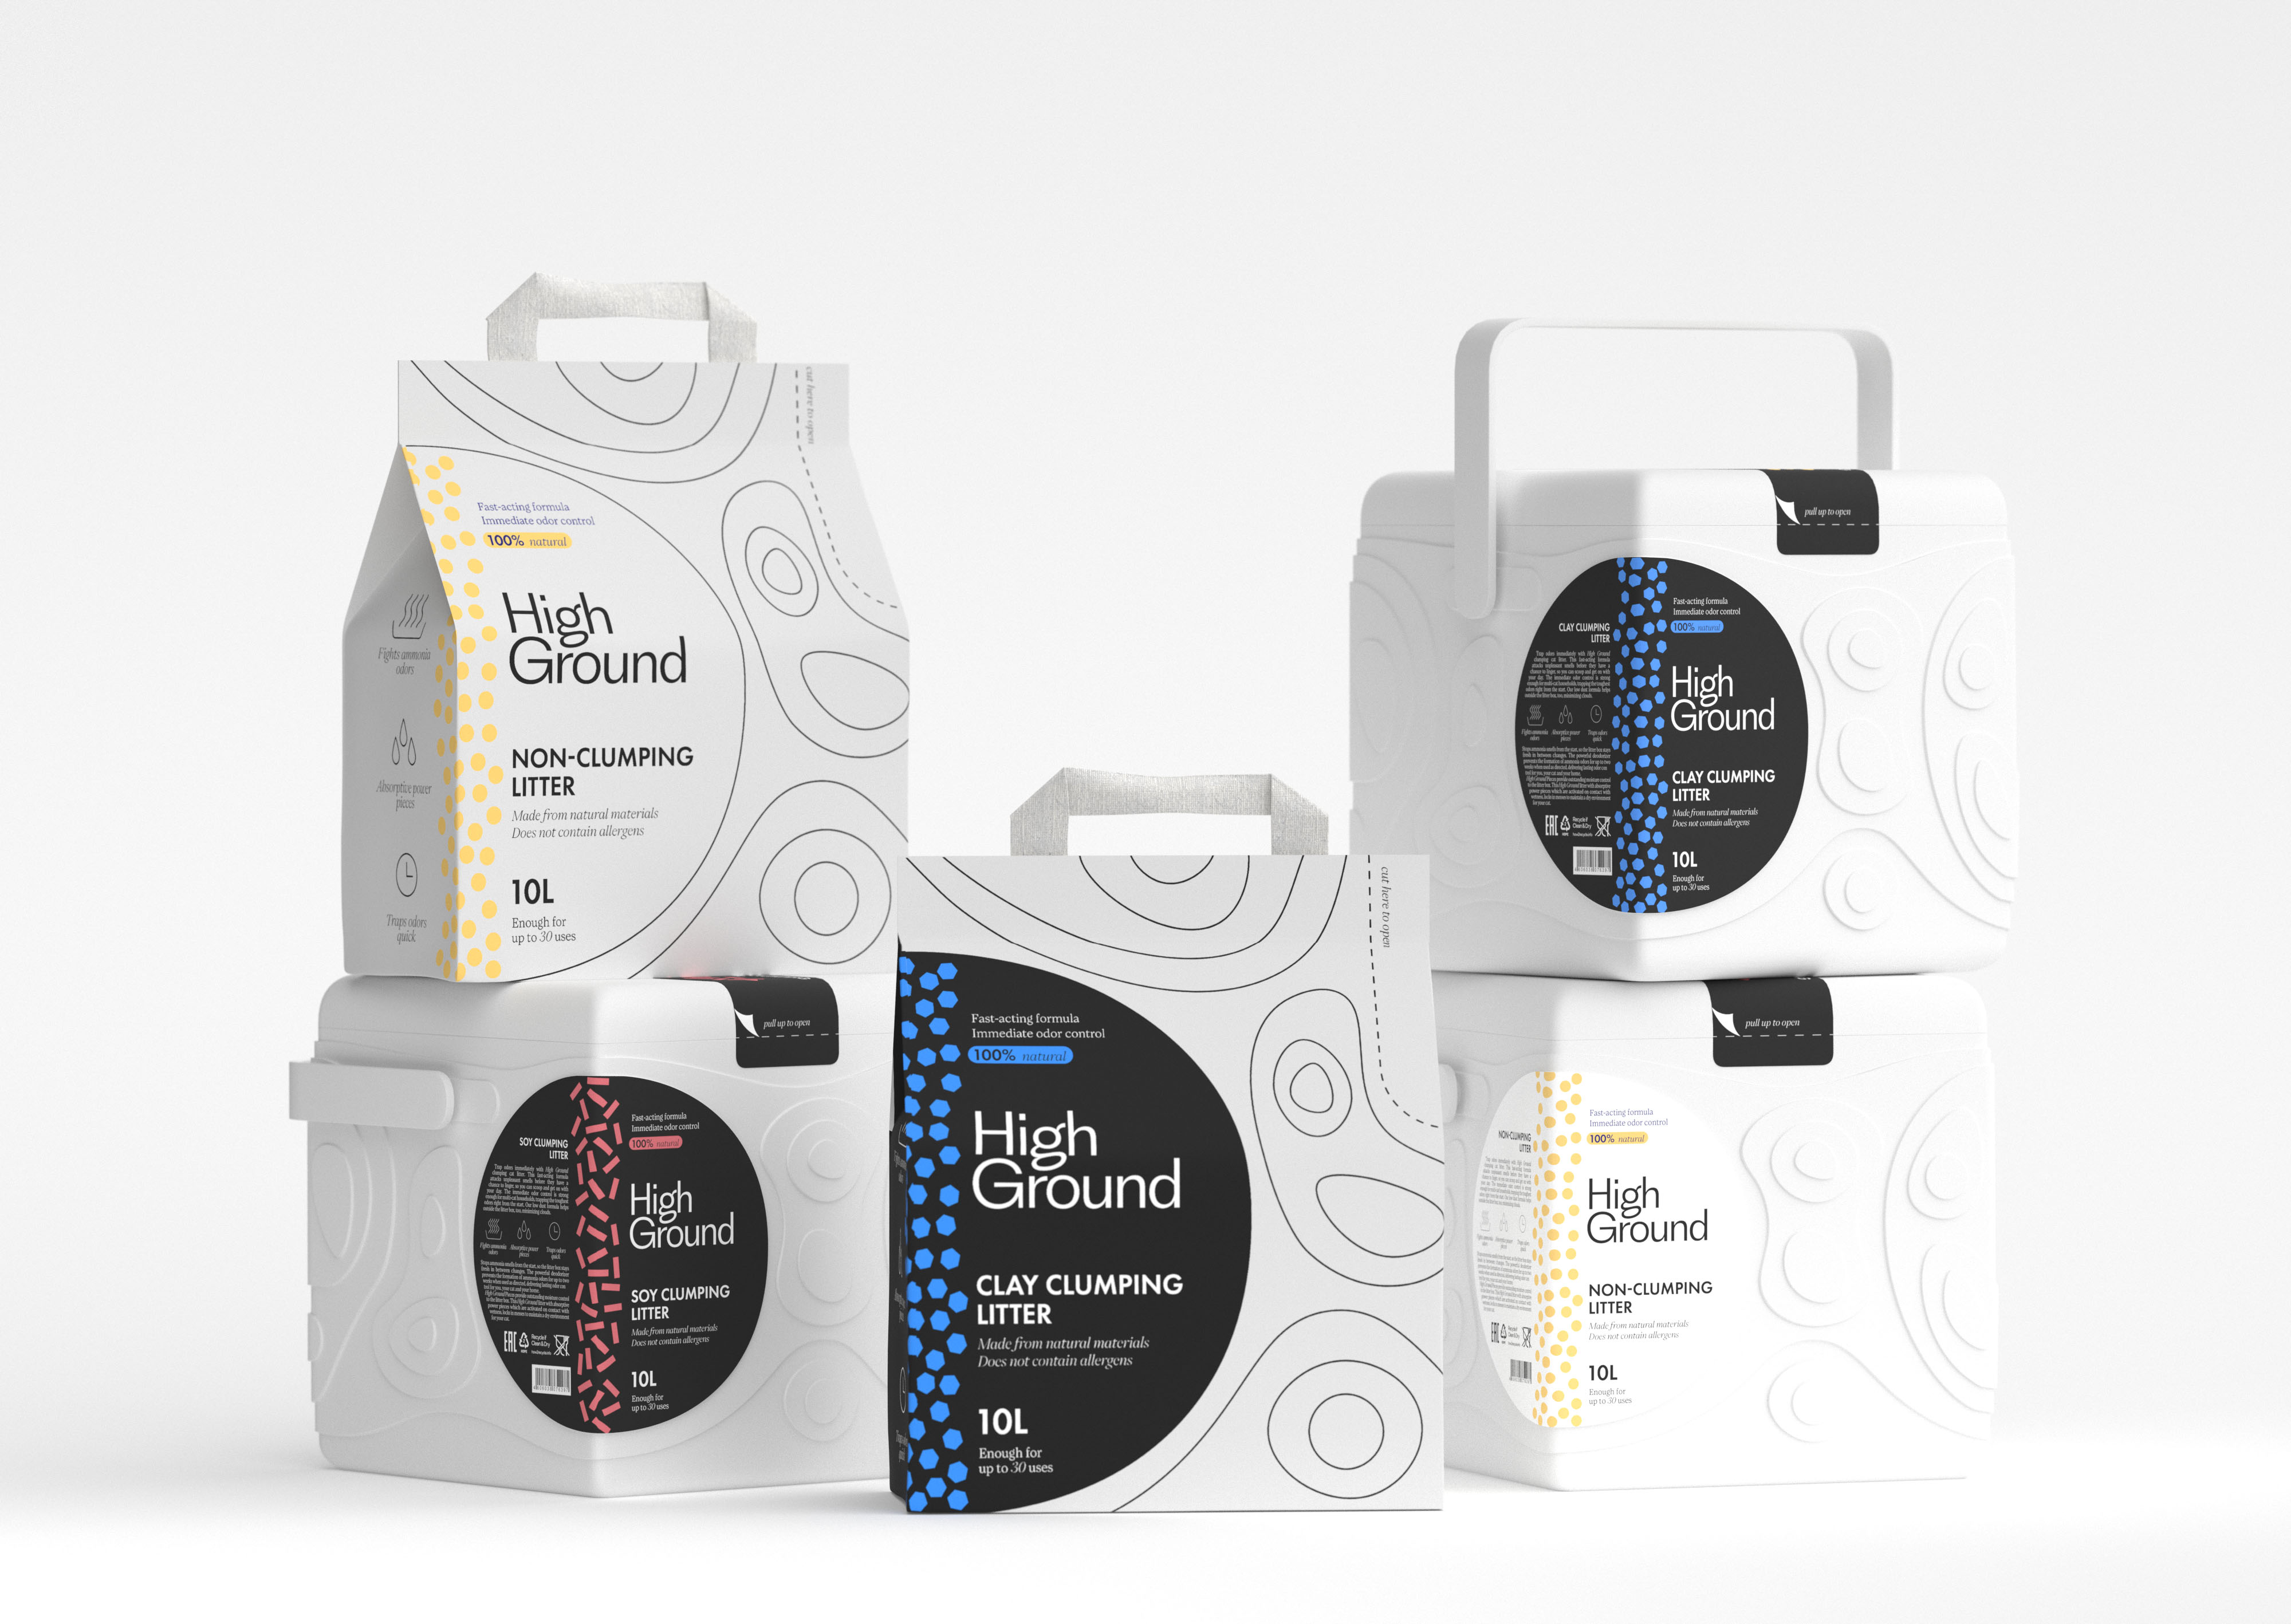 HighGround Student Concept of Cat Litter Packaging